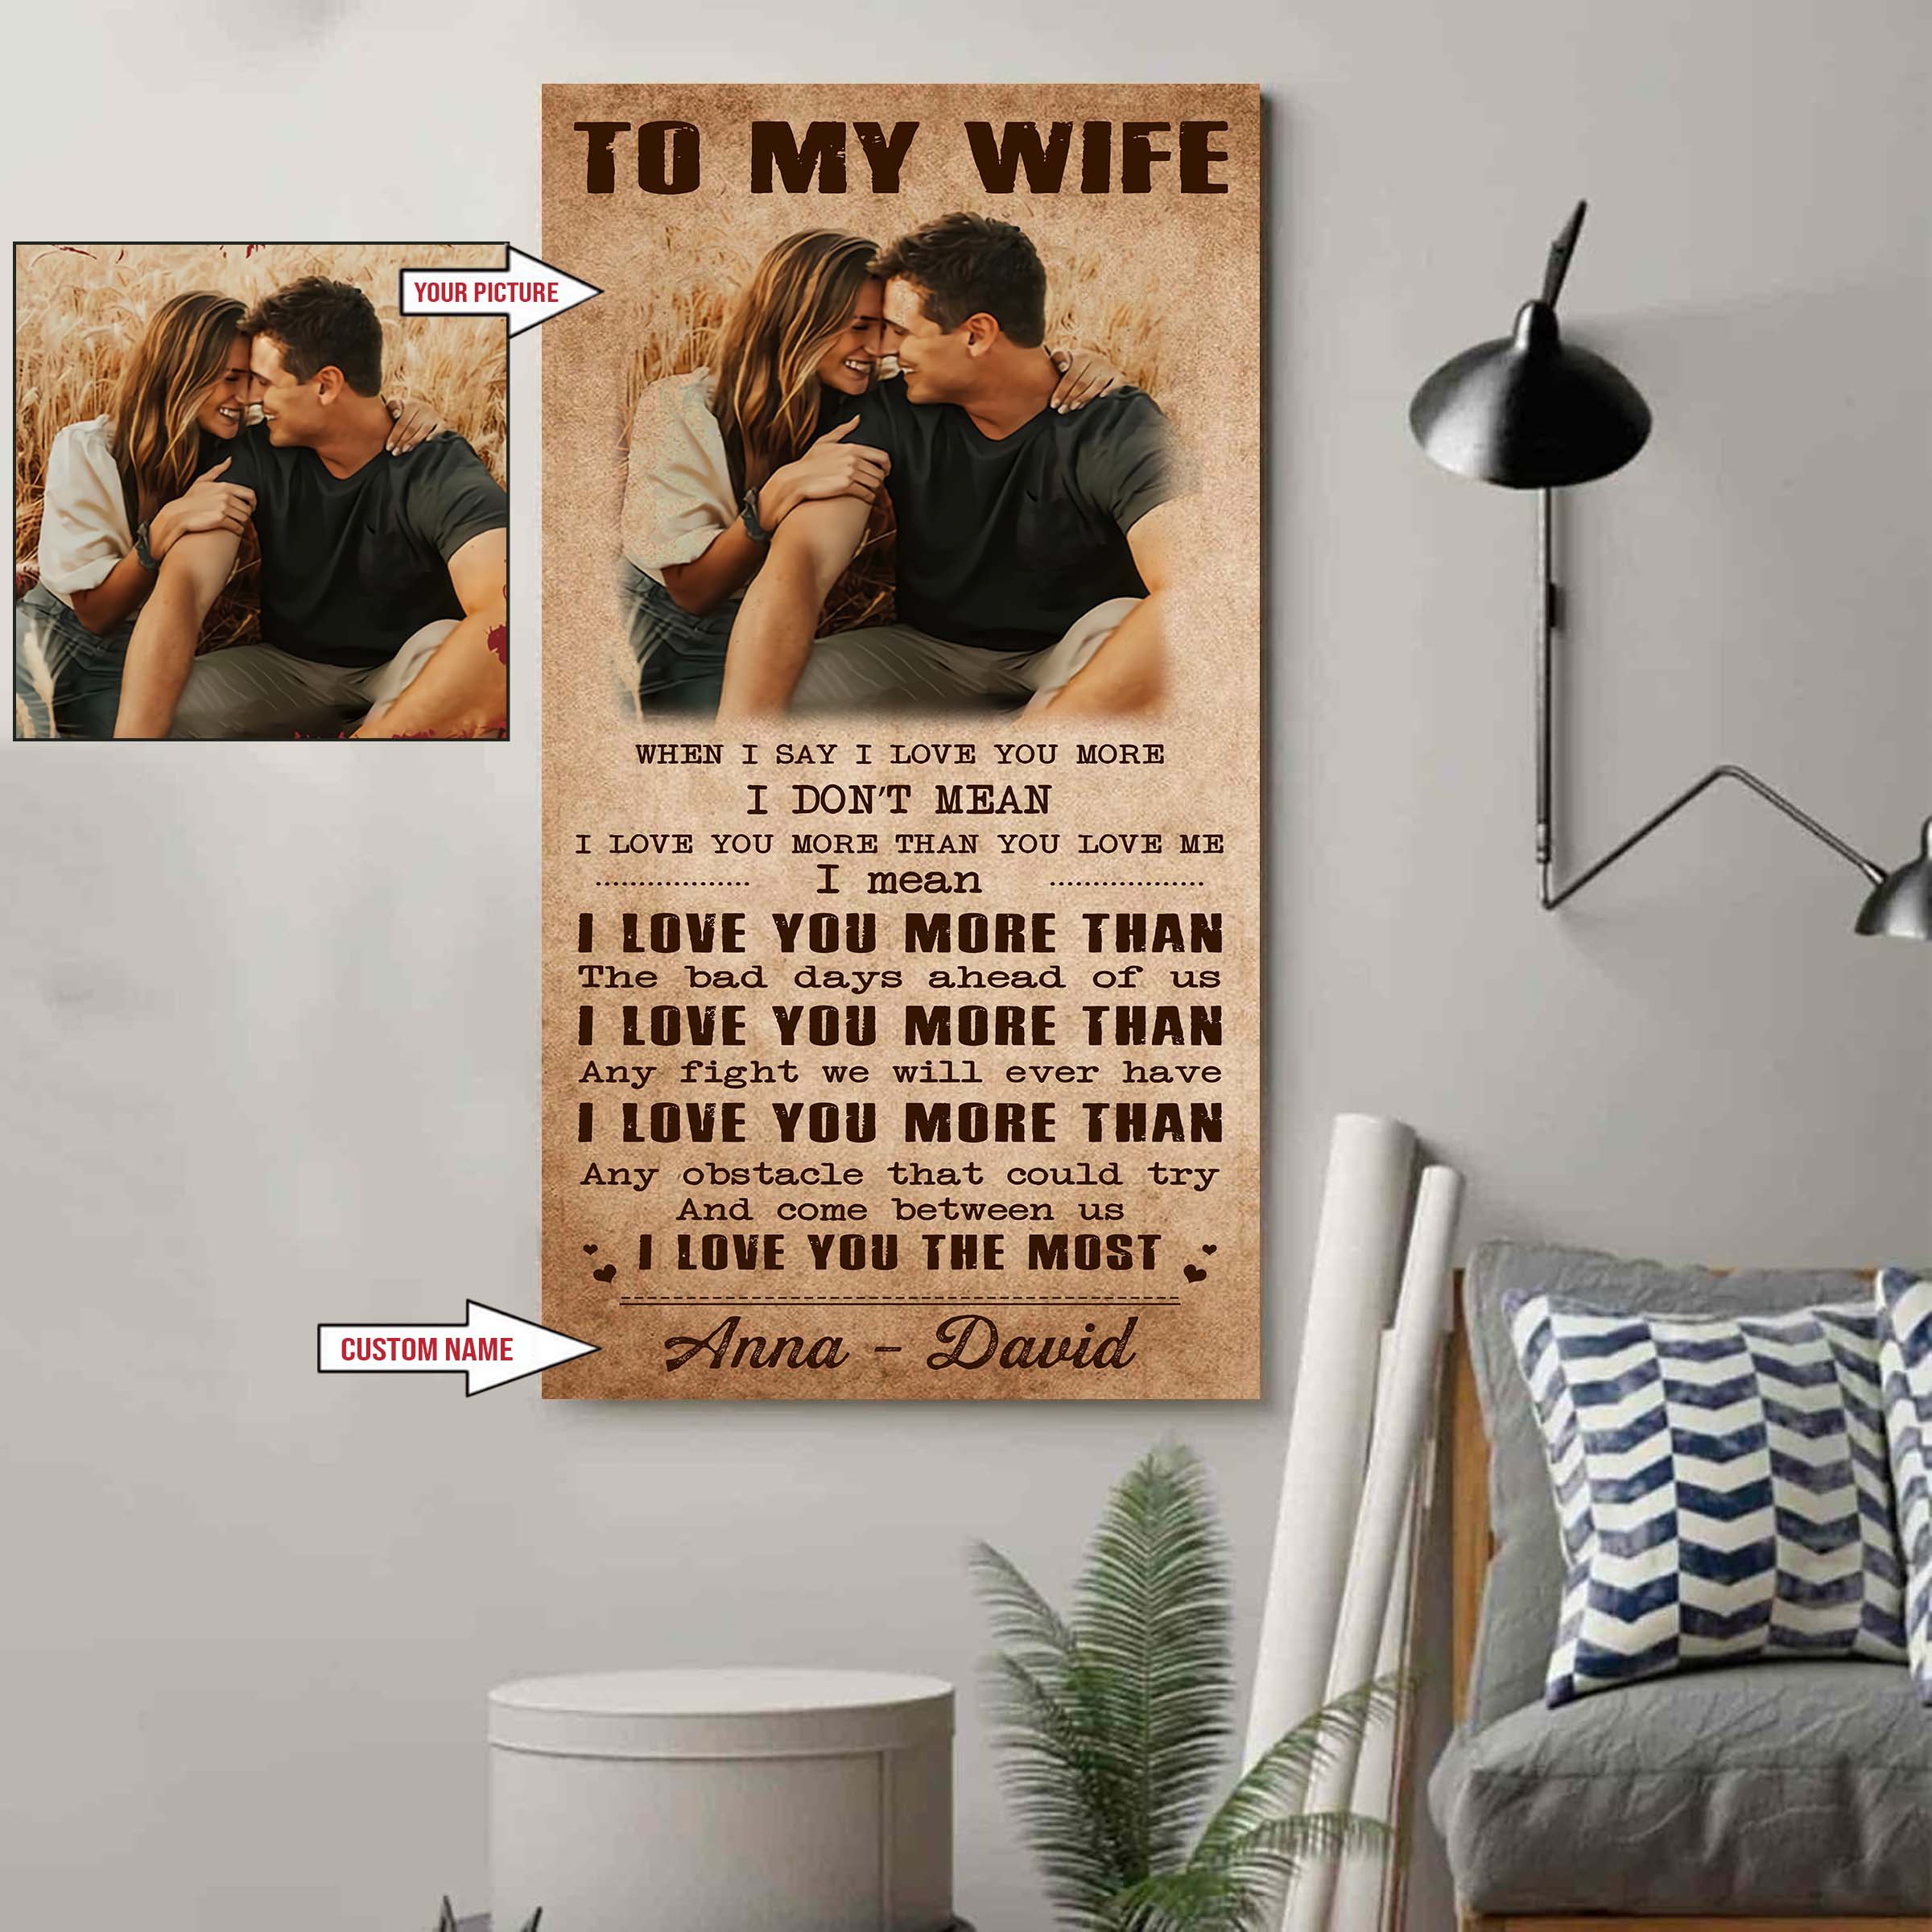 Valentine gifts-Custom image canvas-Husband to Wife- If I could give you one thing in life